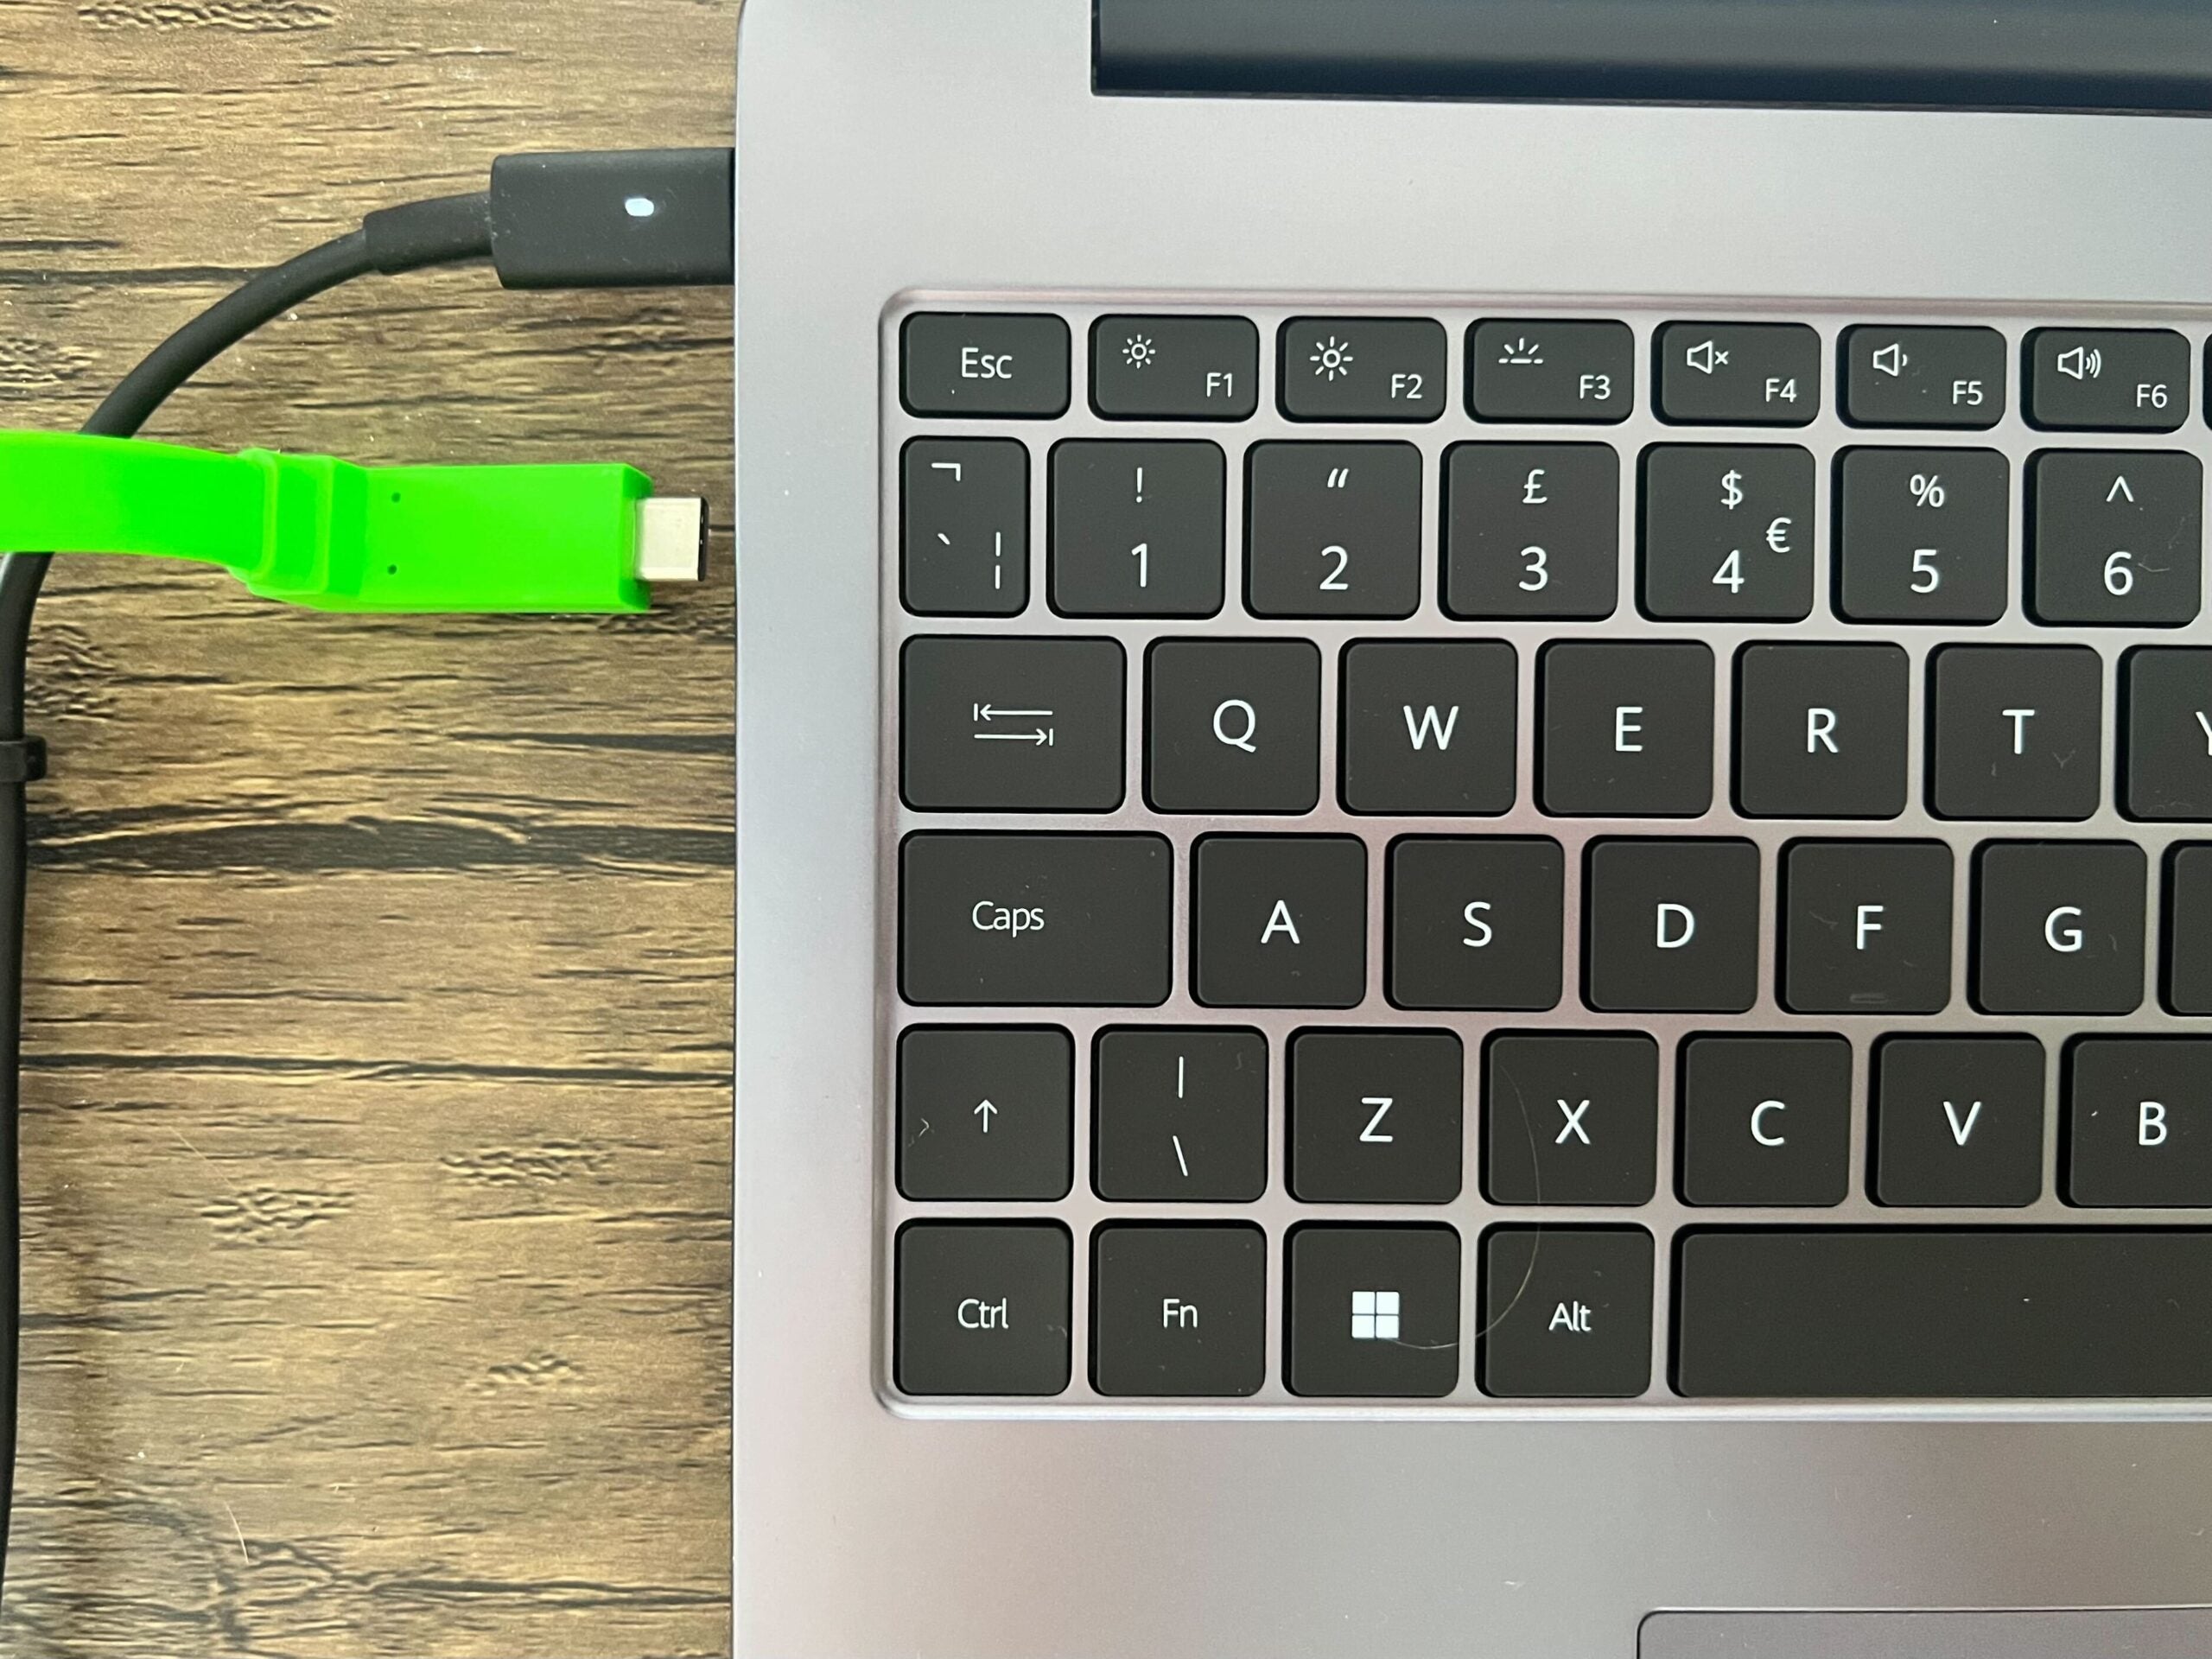 Connect a USB-C cable to your laptop to start